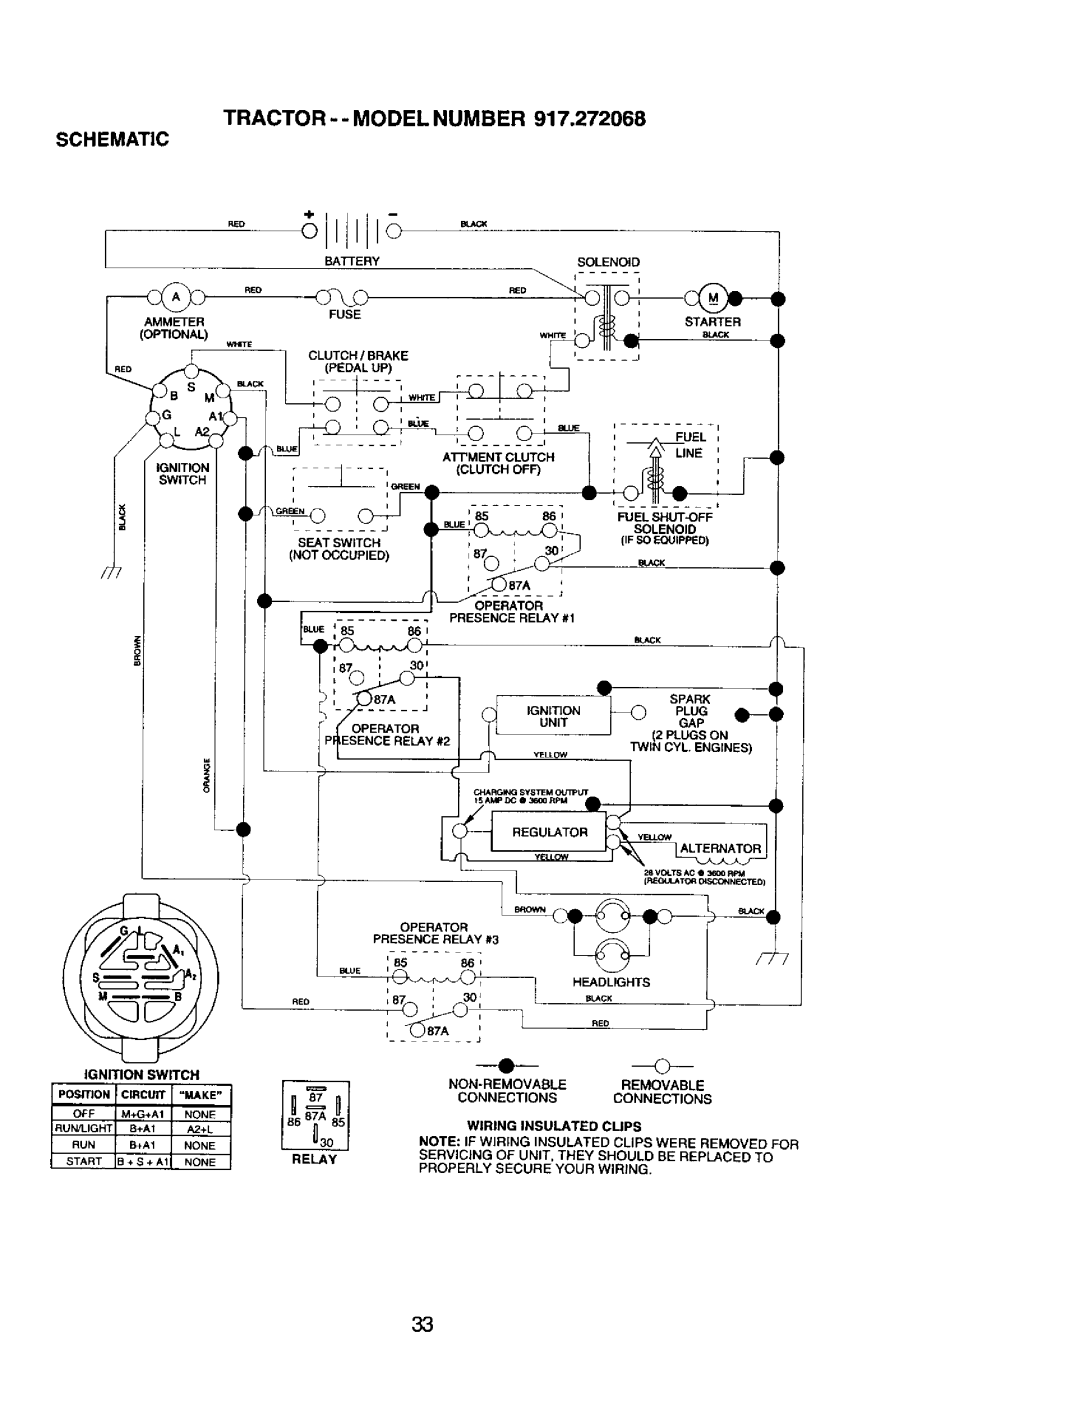 Craftsman 917.272068 Tractor - - Model Number Schematic, Wiring Insulated, Cups, Properly Secure Your Wiring, Connections 